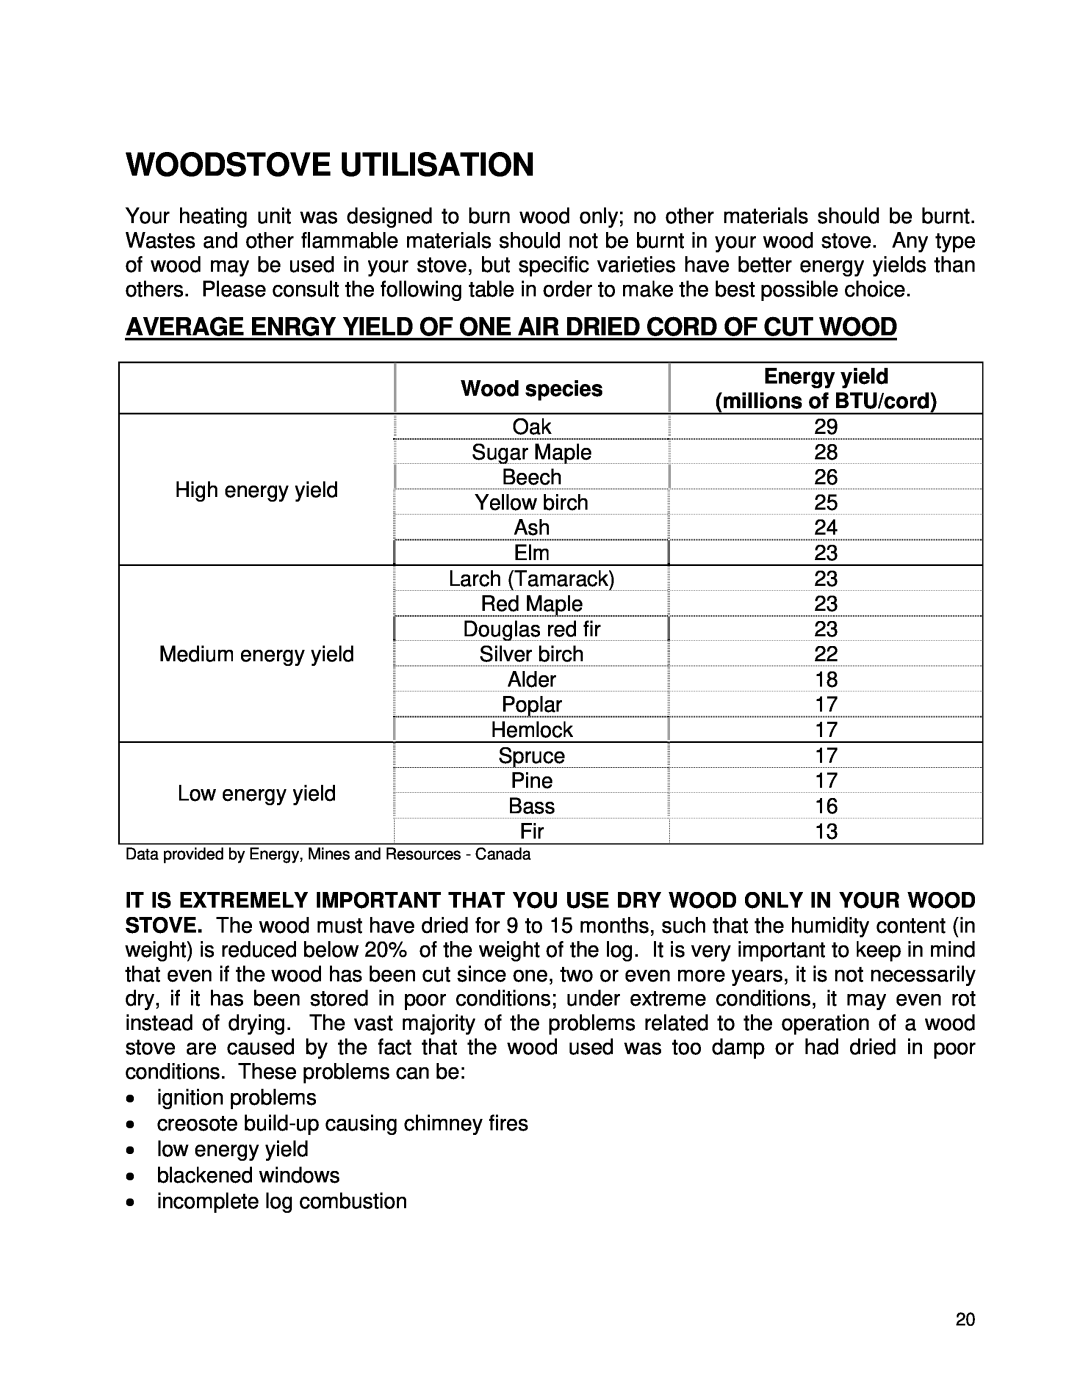 Drolet 58991 owner manual Woodstove Utilisation, Average Enrgy Yield Of One Air Dried Cord Of Cut Wood 